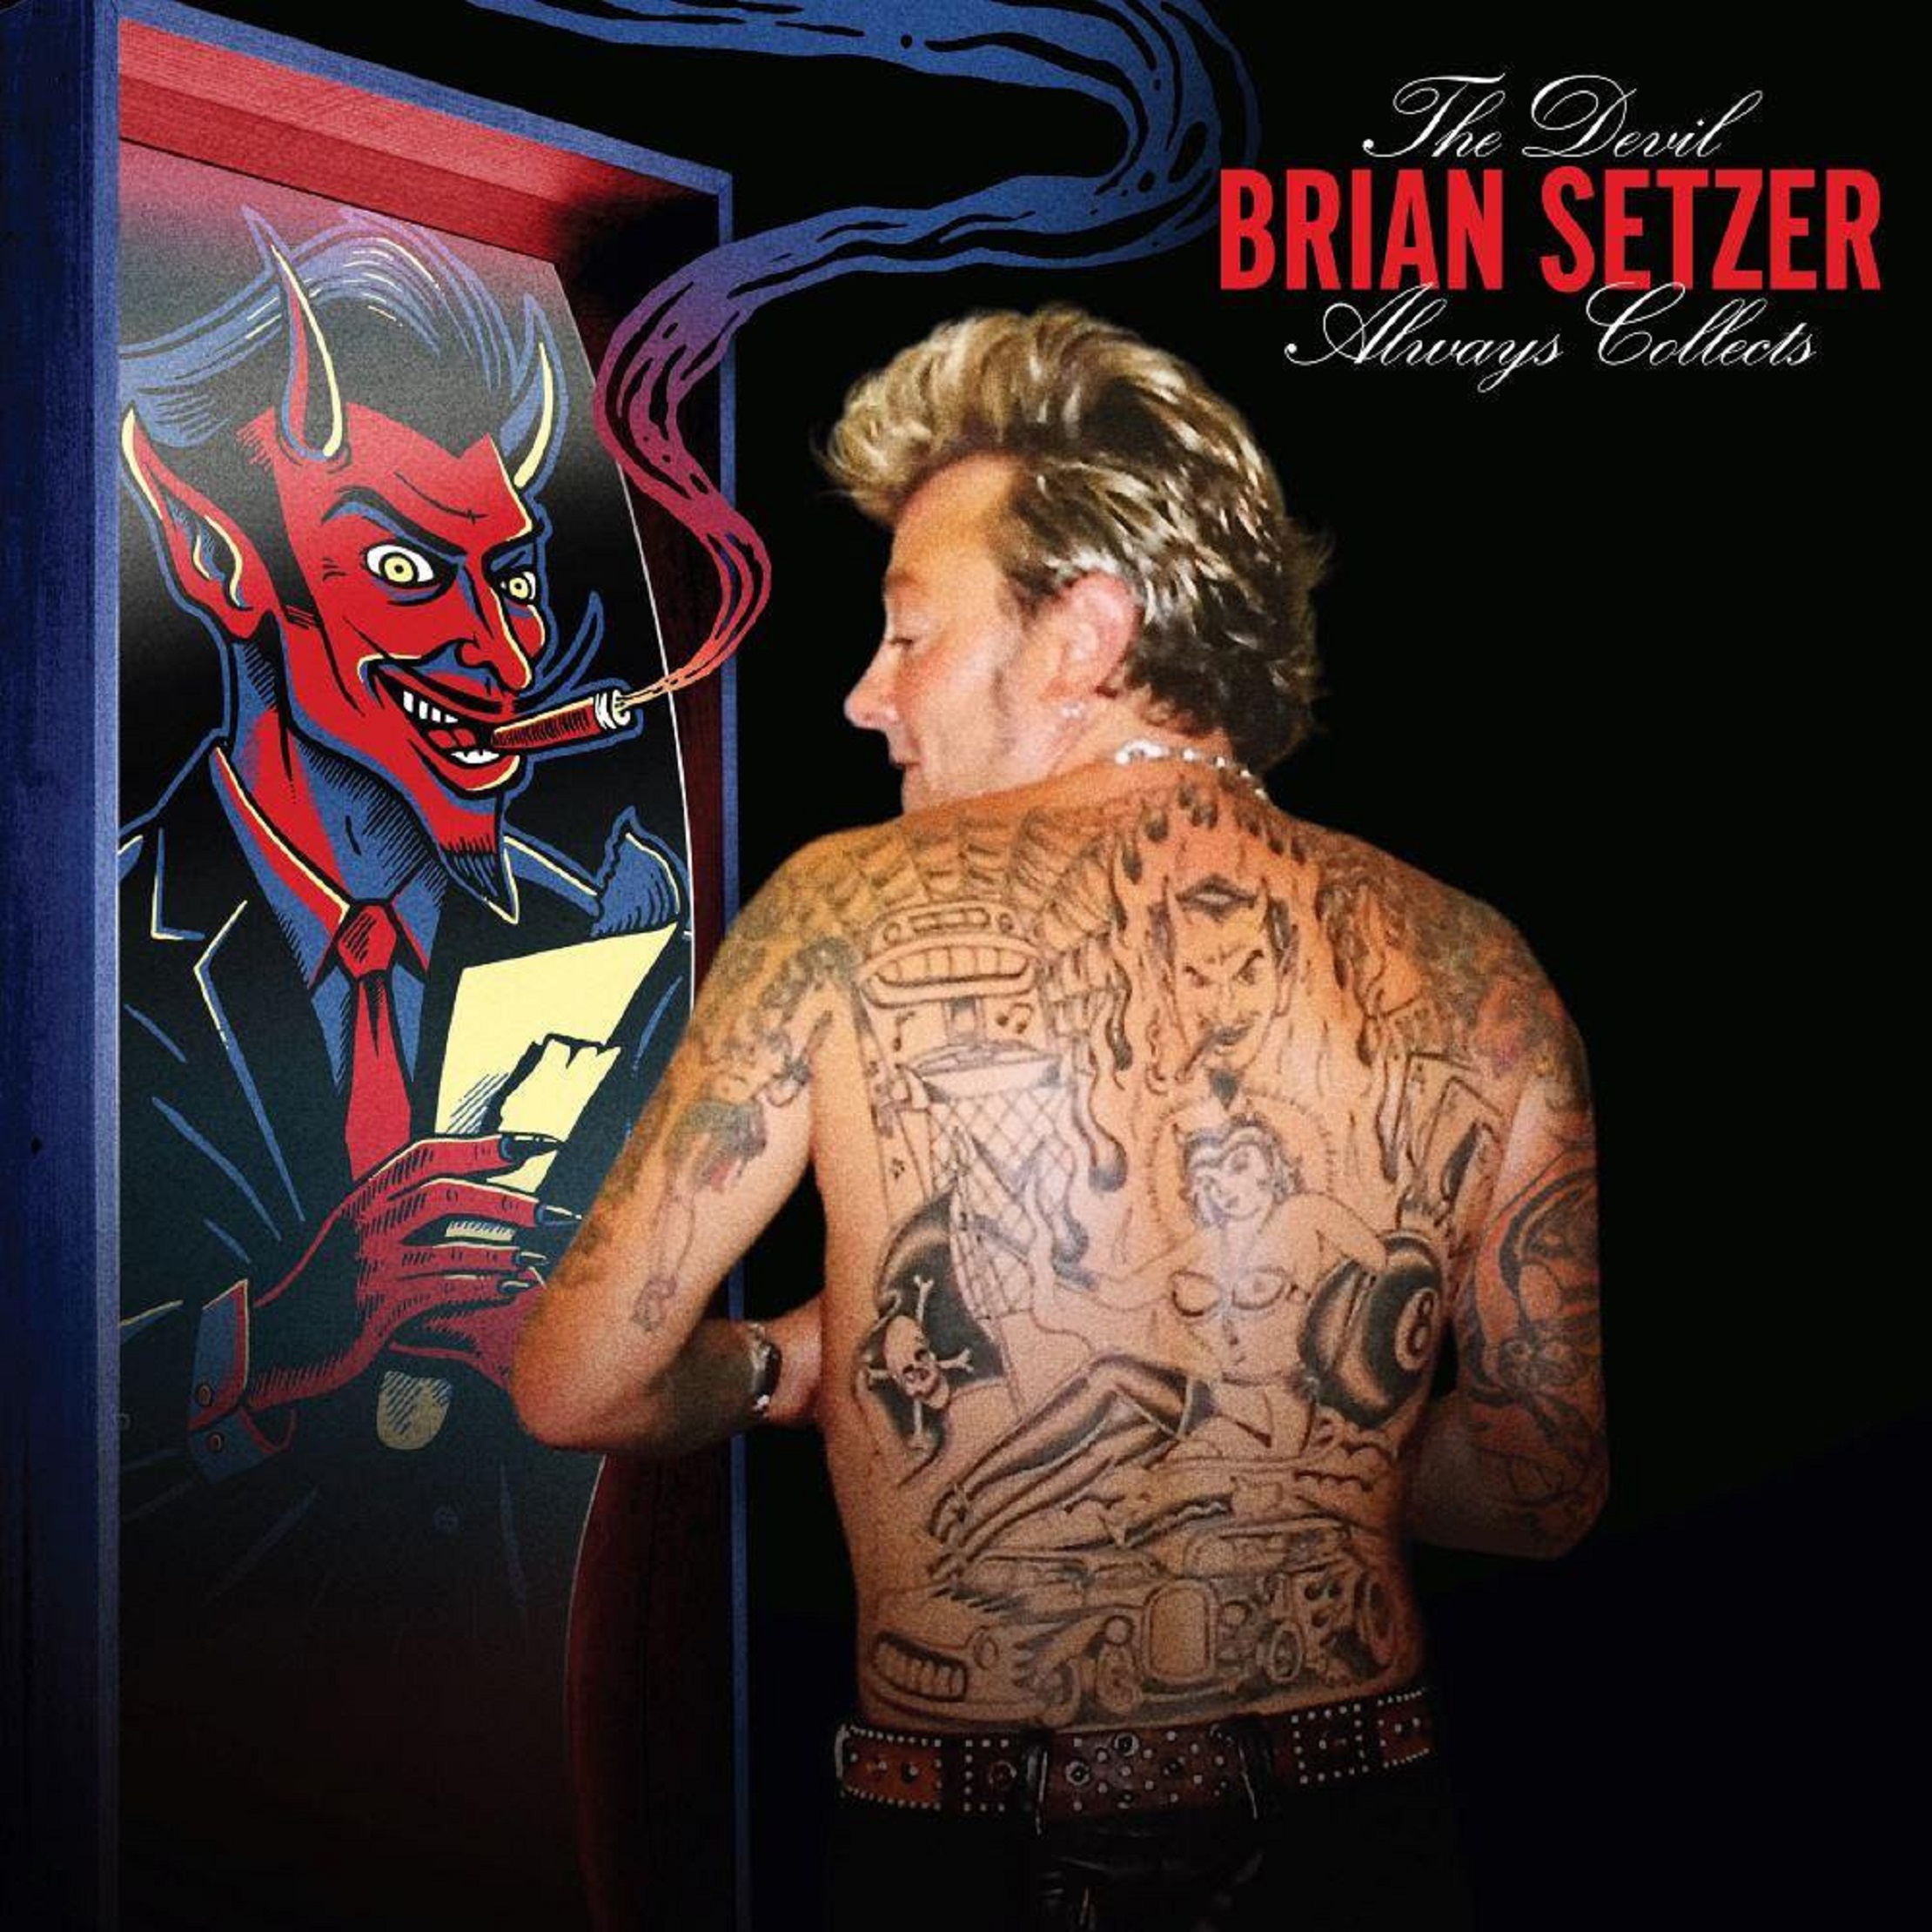 BRIAN SETZER Unveils Third Track “THE DEVIL ALWAYS COLLECTS” From New Solo Album Of The Same Name